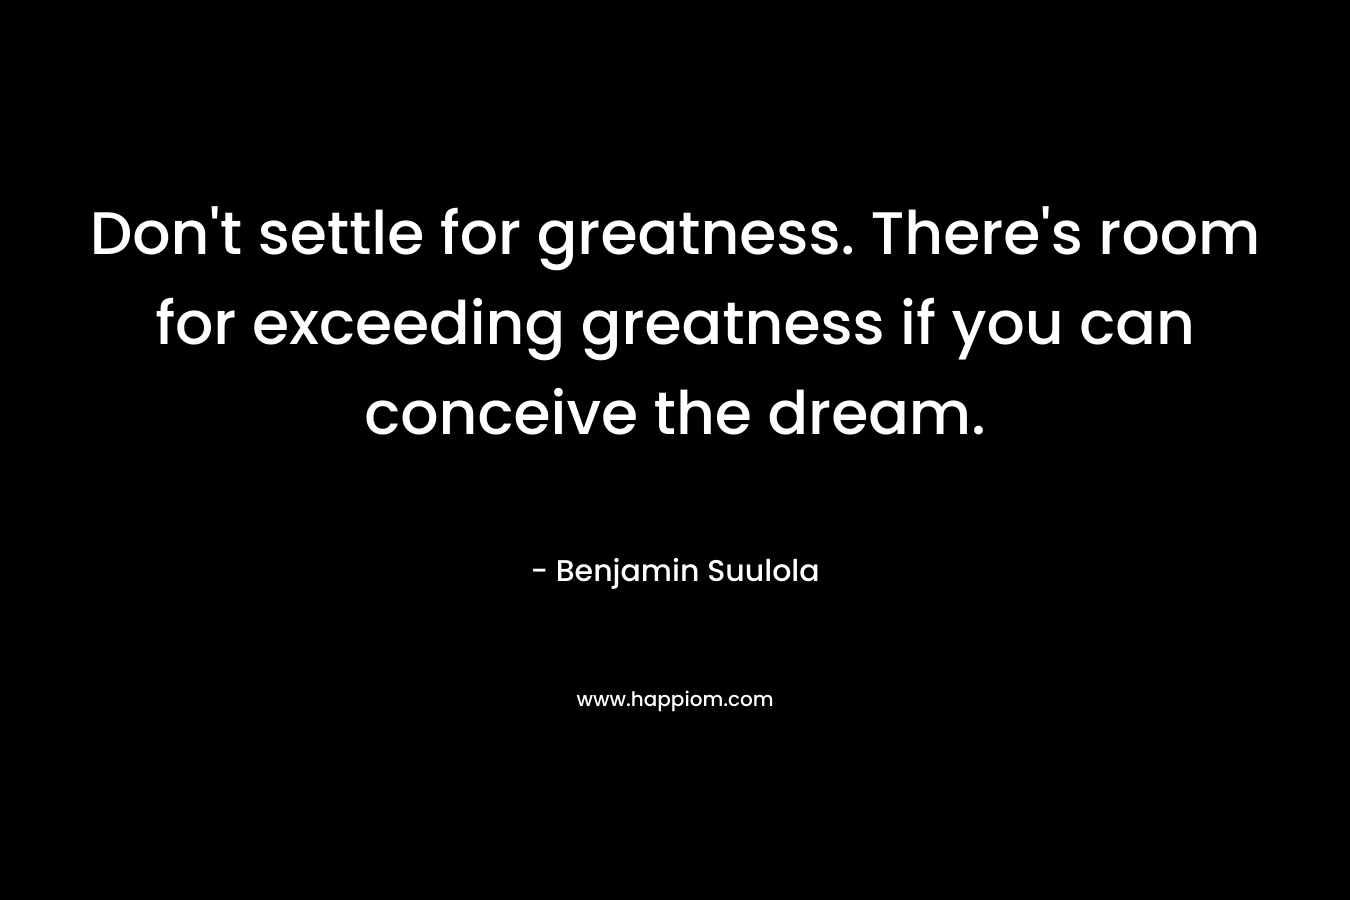 Don't settle for greatness. There's room for exceeding greatness if you can conceive the dream.